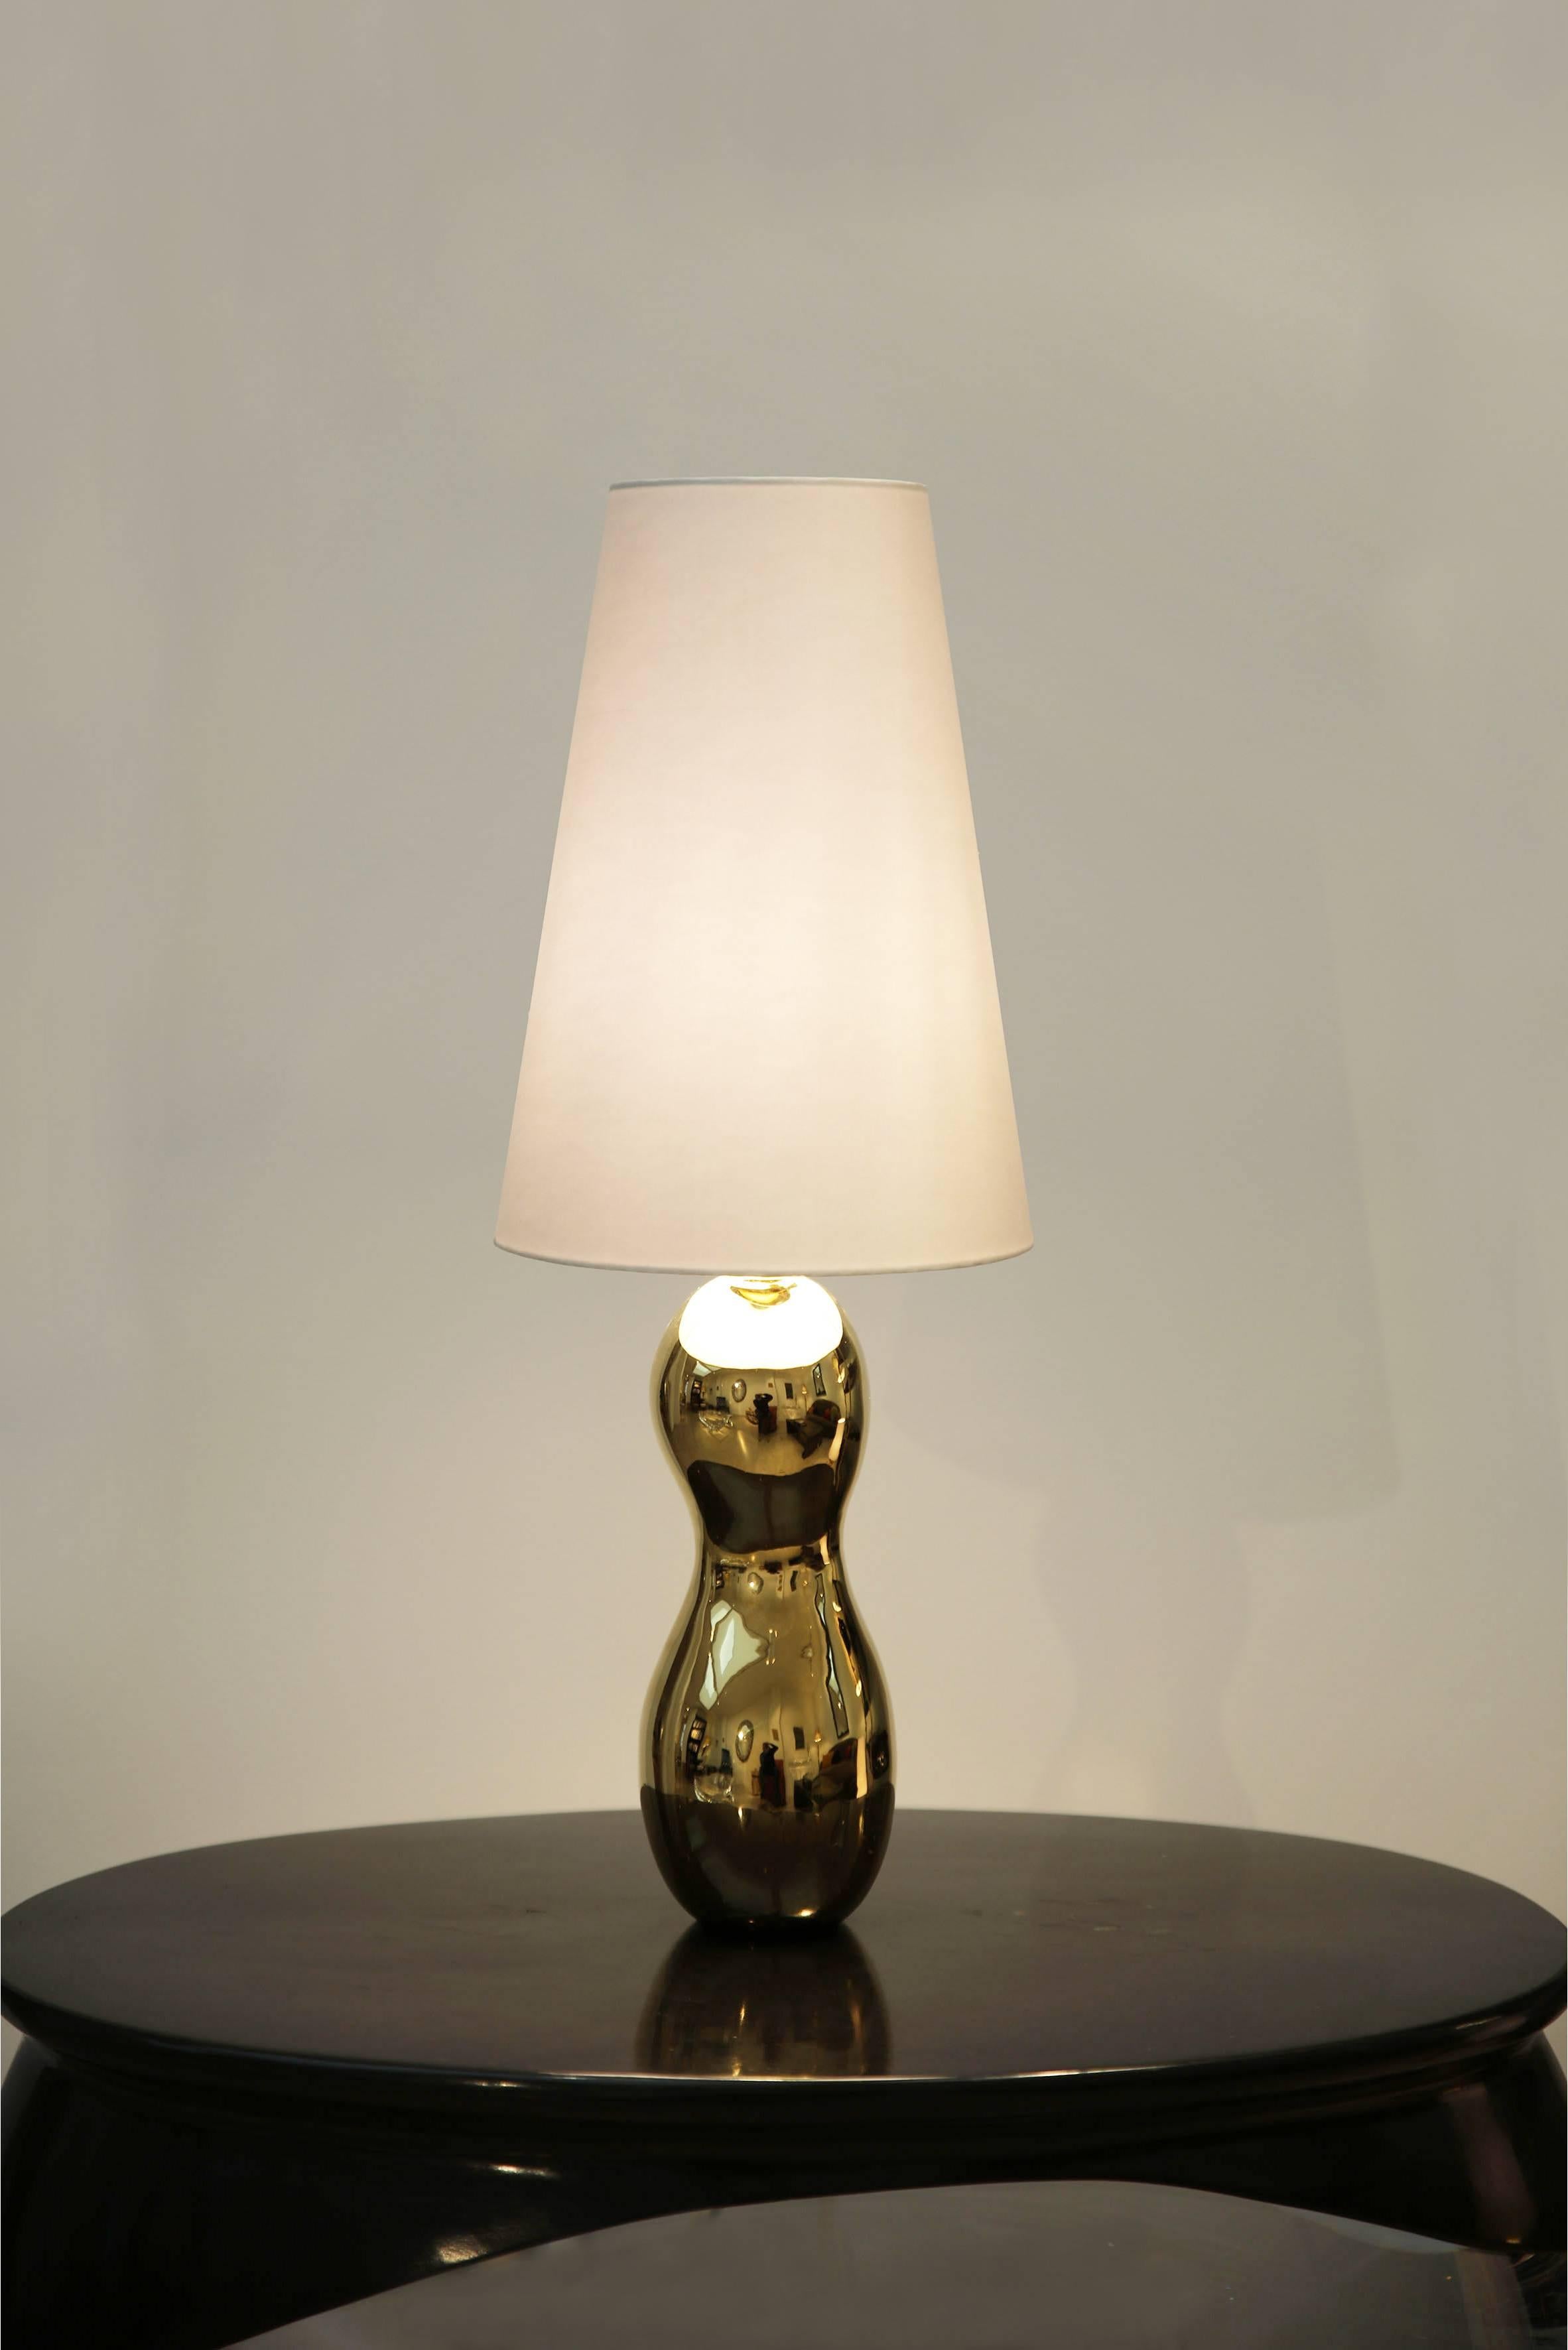 Sold individually. Price is per table lamp. There are two available. 

Garouste & Bonetti
Table Lamp 'Three Graces' 
1999
Gold plated bronze
H63 x Diam. 24cm / 24.8 x Diam. 9.4 in
BG99-22

For EU buyers this piece is subject to a 20% VAT tax, which